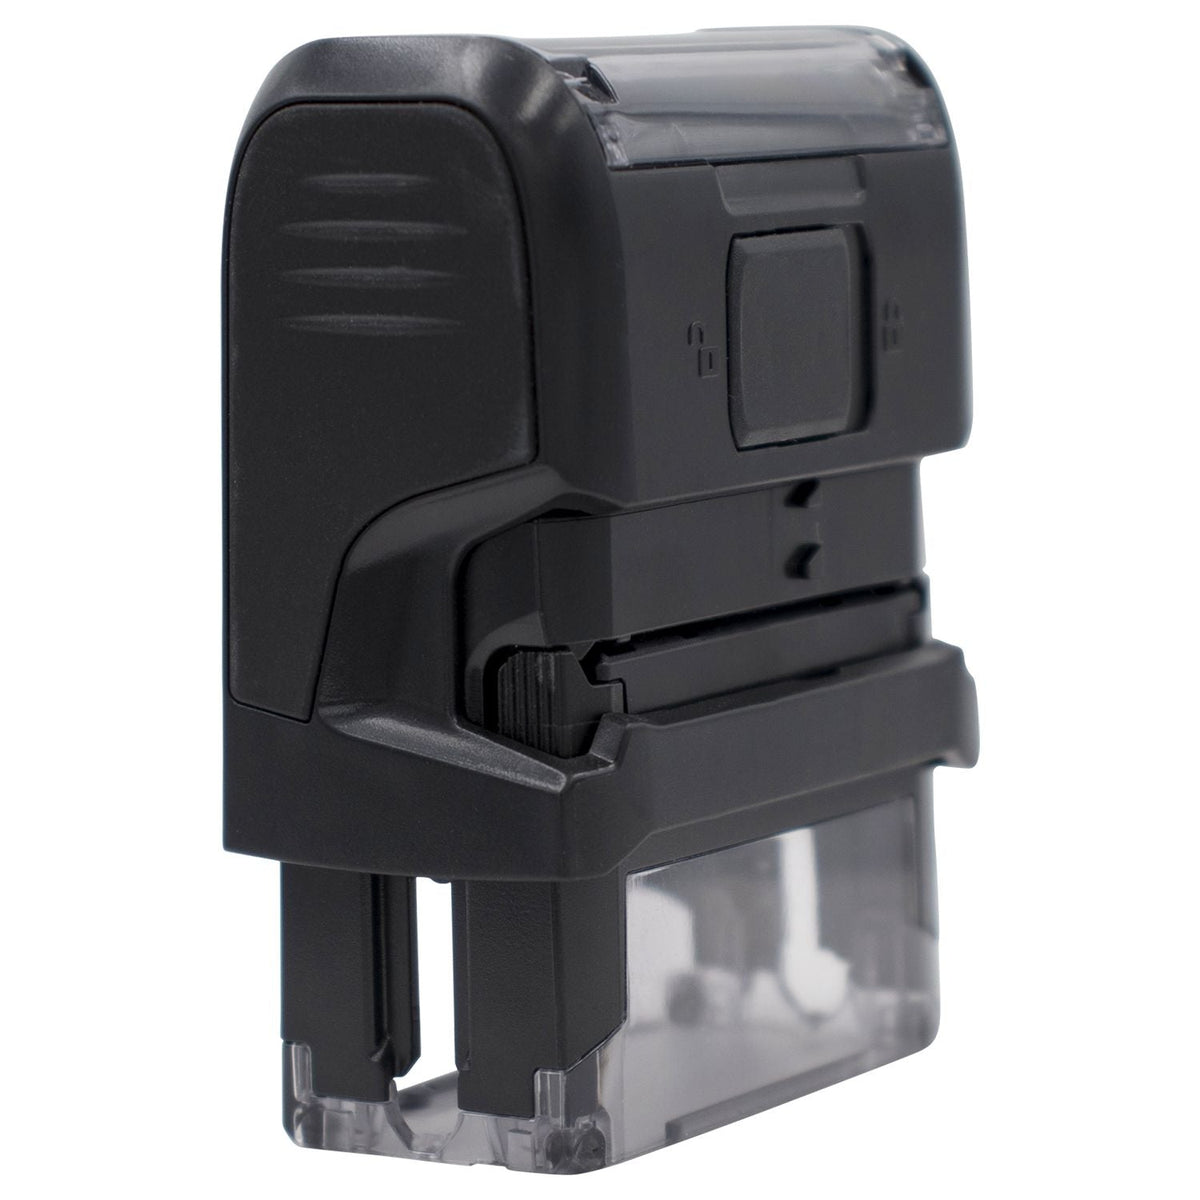 Self-Inking Please Pay Now No Statements Stamp Back View